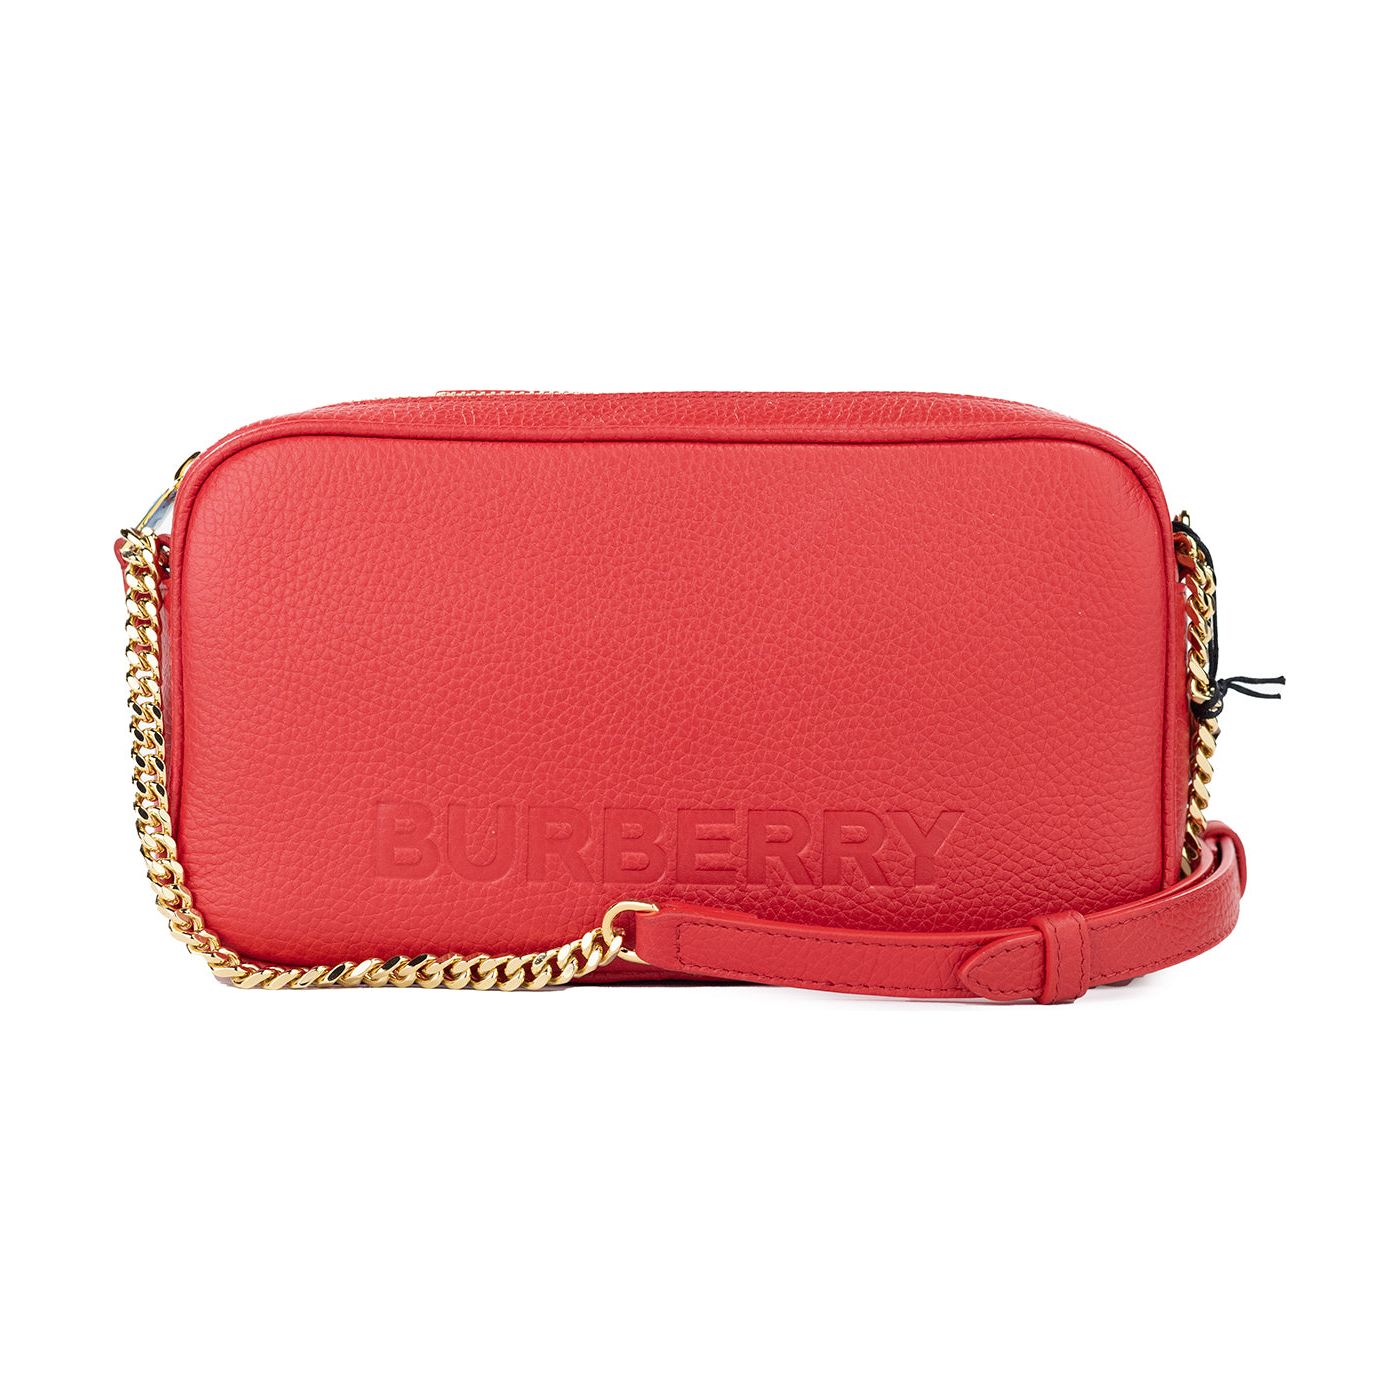 Burberry Small Red Pebbled Leather Elongated Camera Crossbody Bag Purse small-red-pebbled-leather-elongated-camera-crossbody-bag-purse